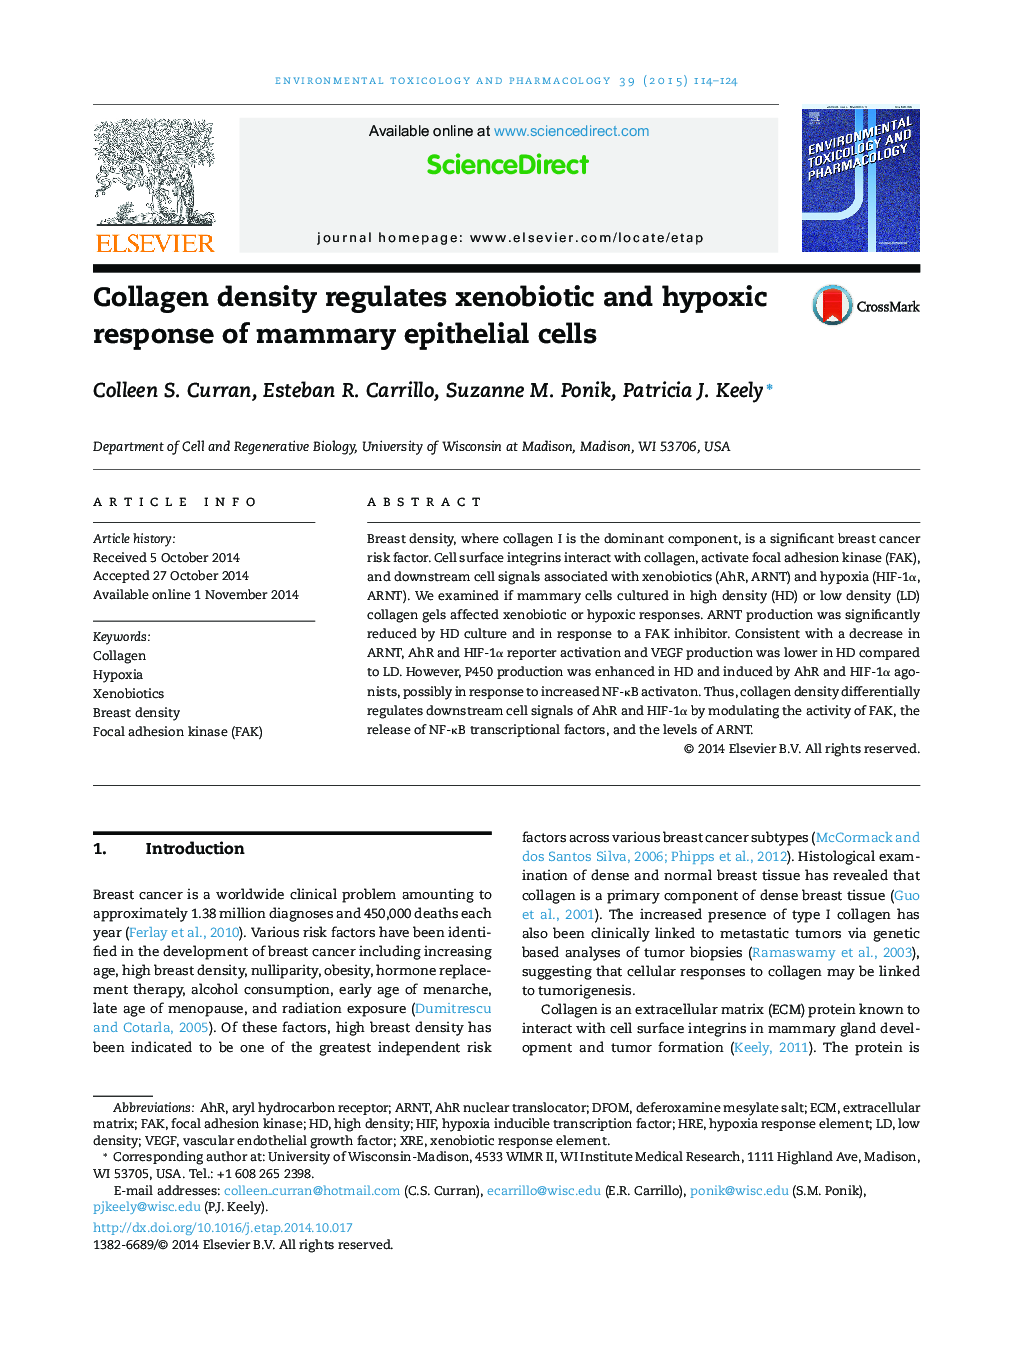 Collagen density regulates xenobiotic and hypoxic response of mammary epithelial cells